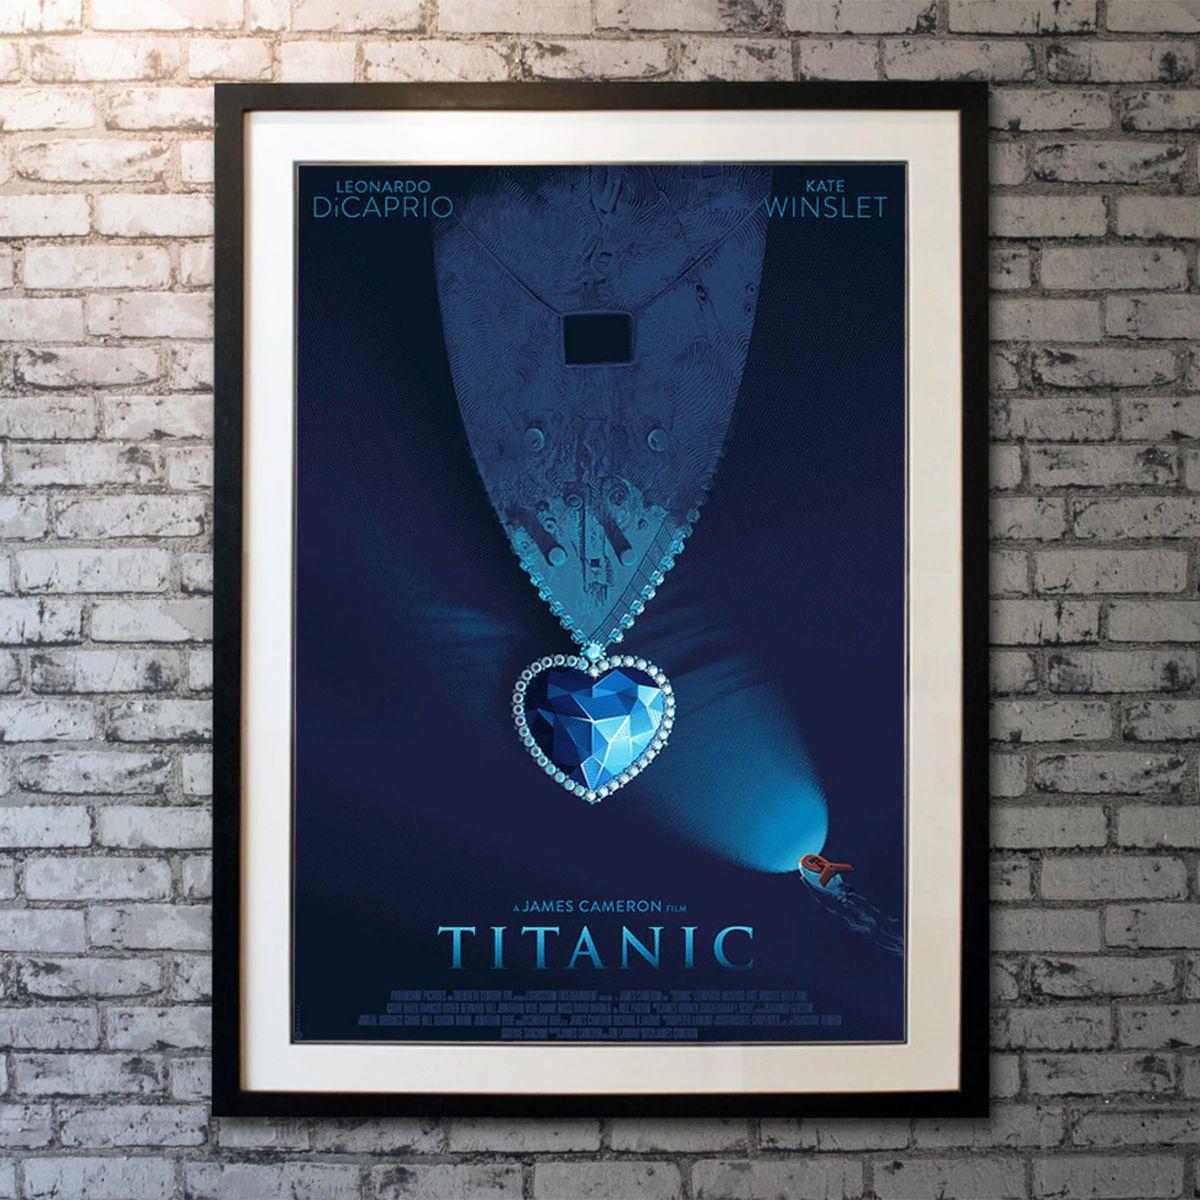 Titanic, Unframed Poster, 2019

Limited Edition Print (24 x 36). 2019 Limited Edition screen print of 325 by artist Laurent Durieux for 